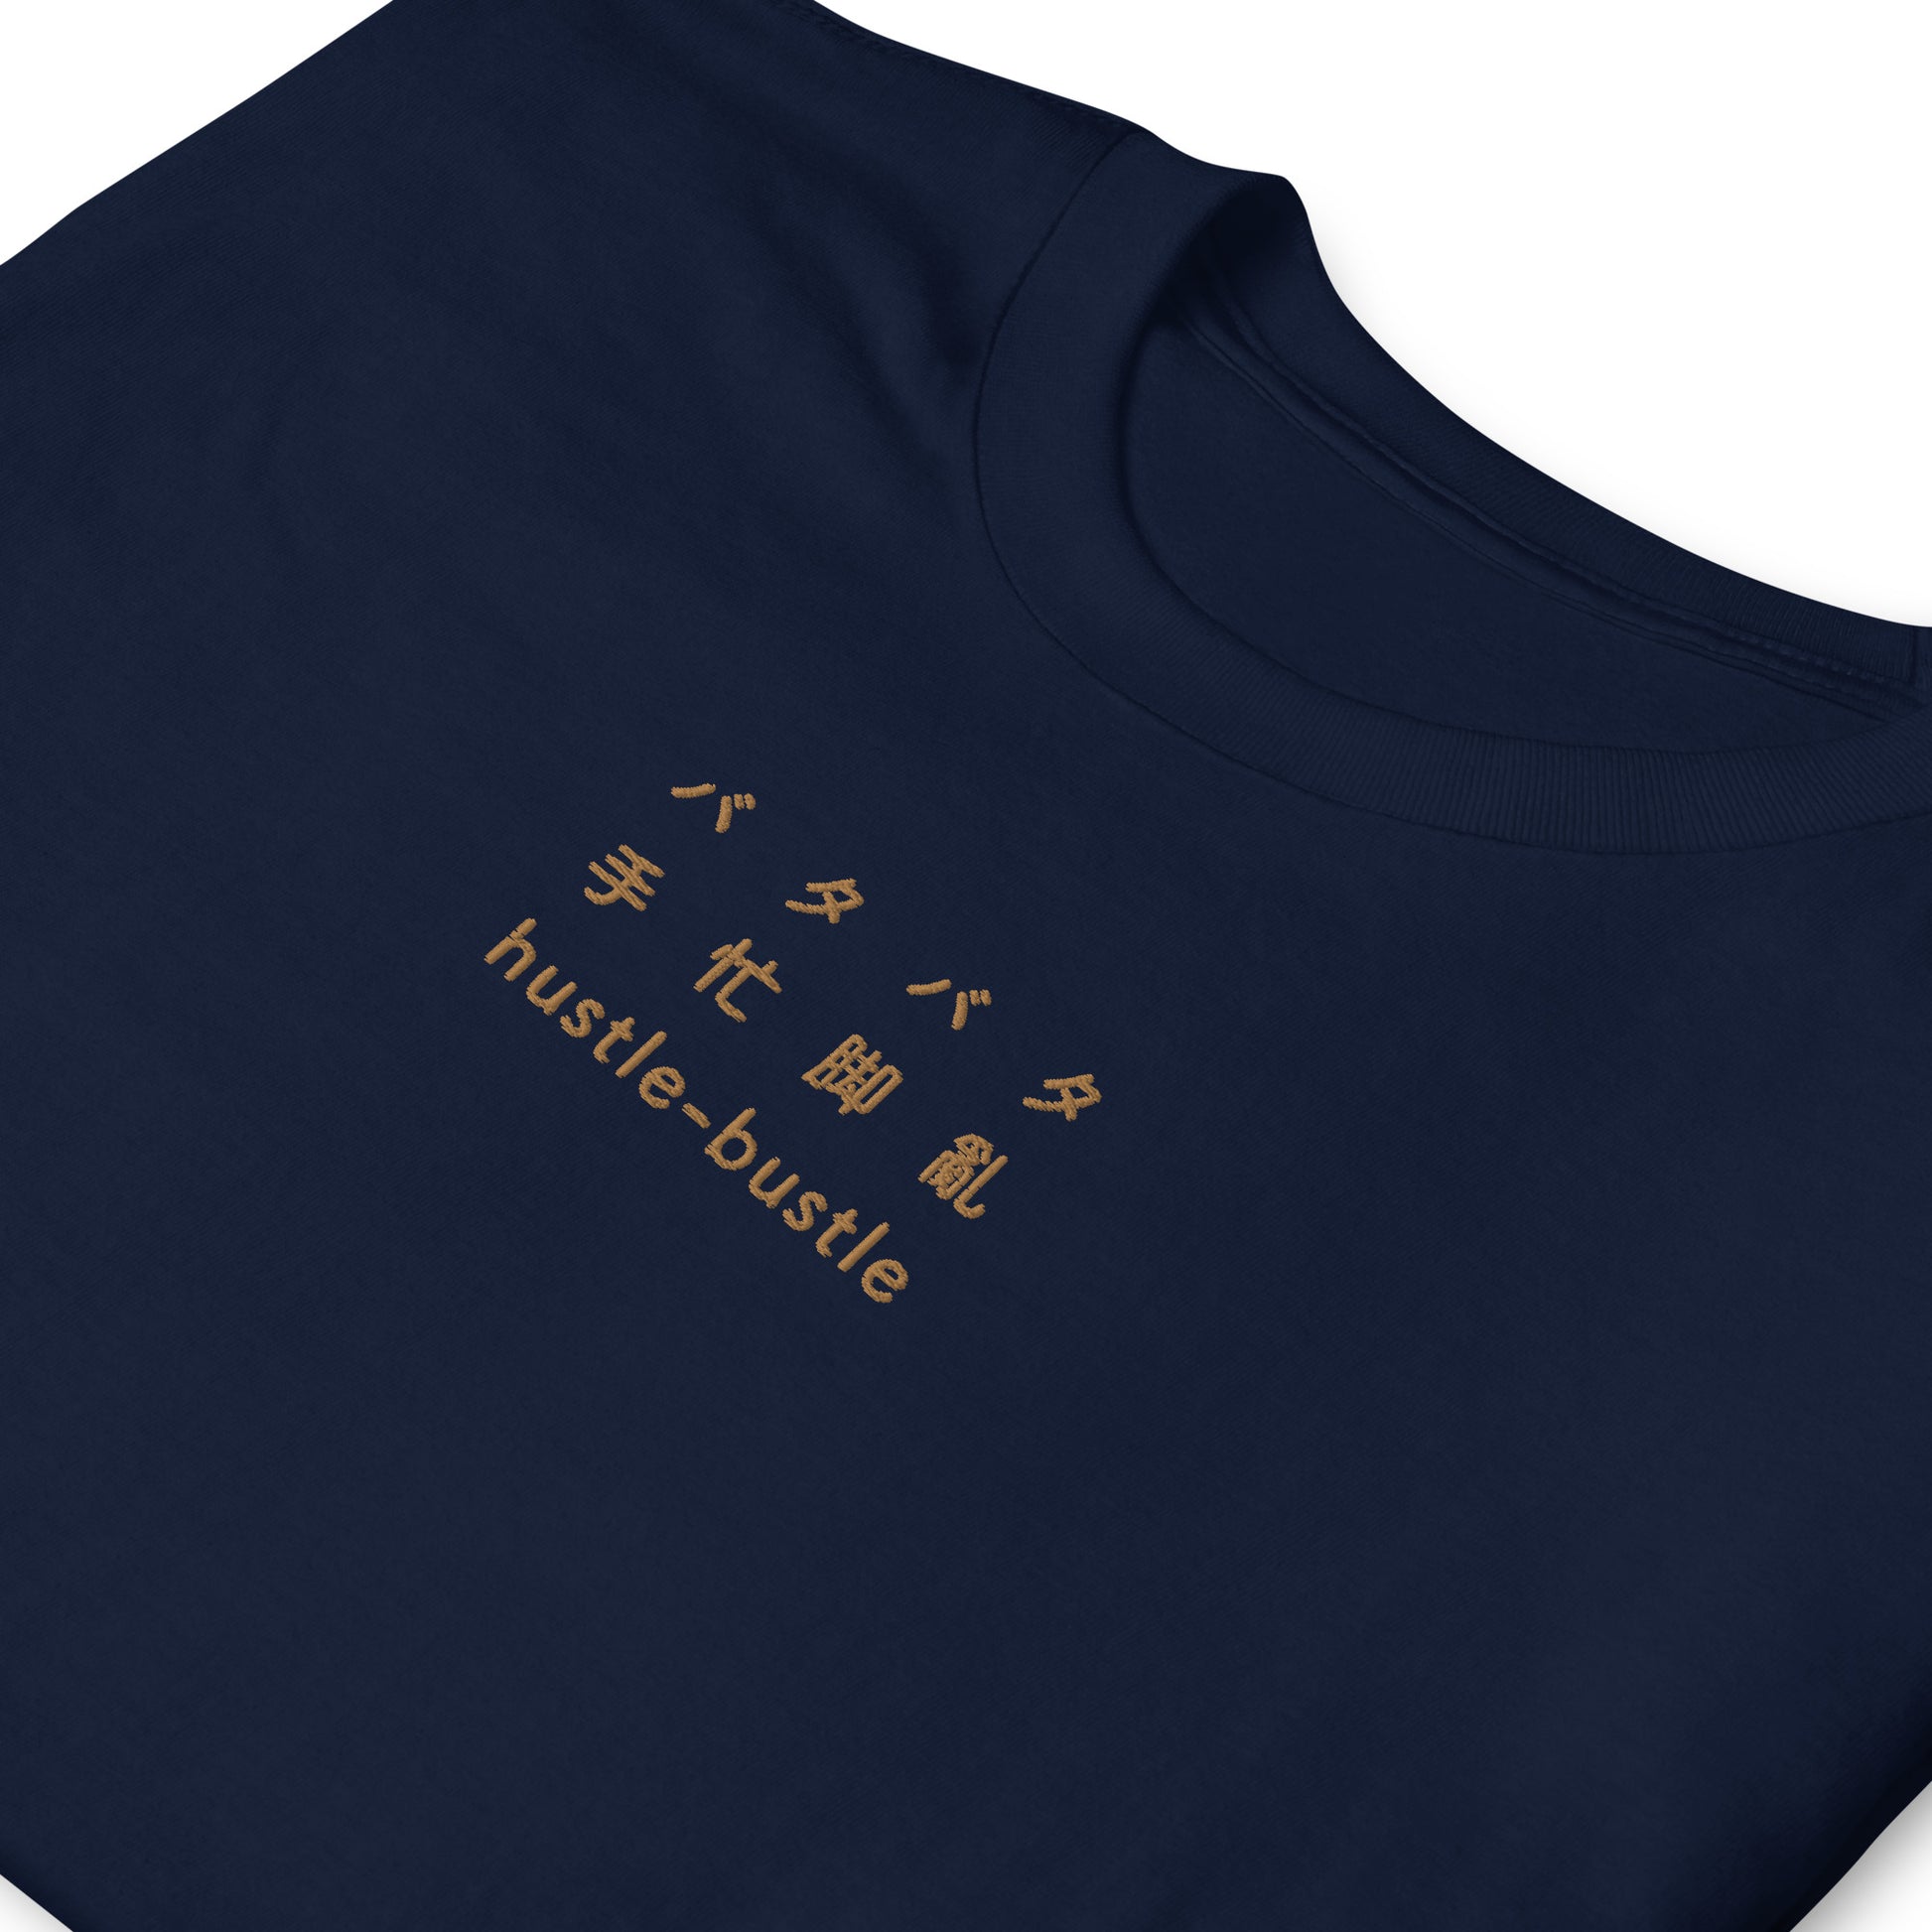 Navy High Quality Tee - Front Design with an Brown Embroidery "Hustle-Bustle" in Japanese, Chinese and English